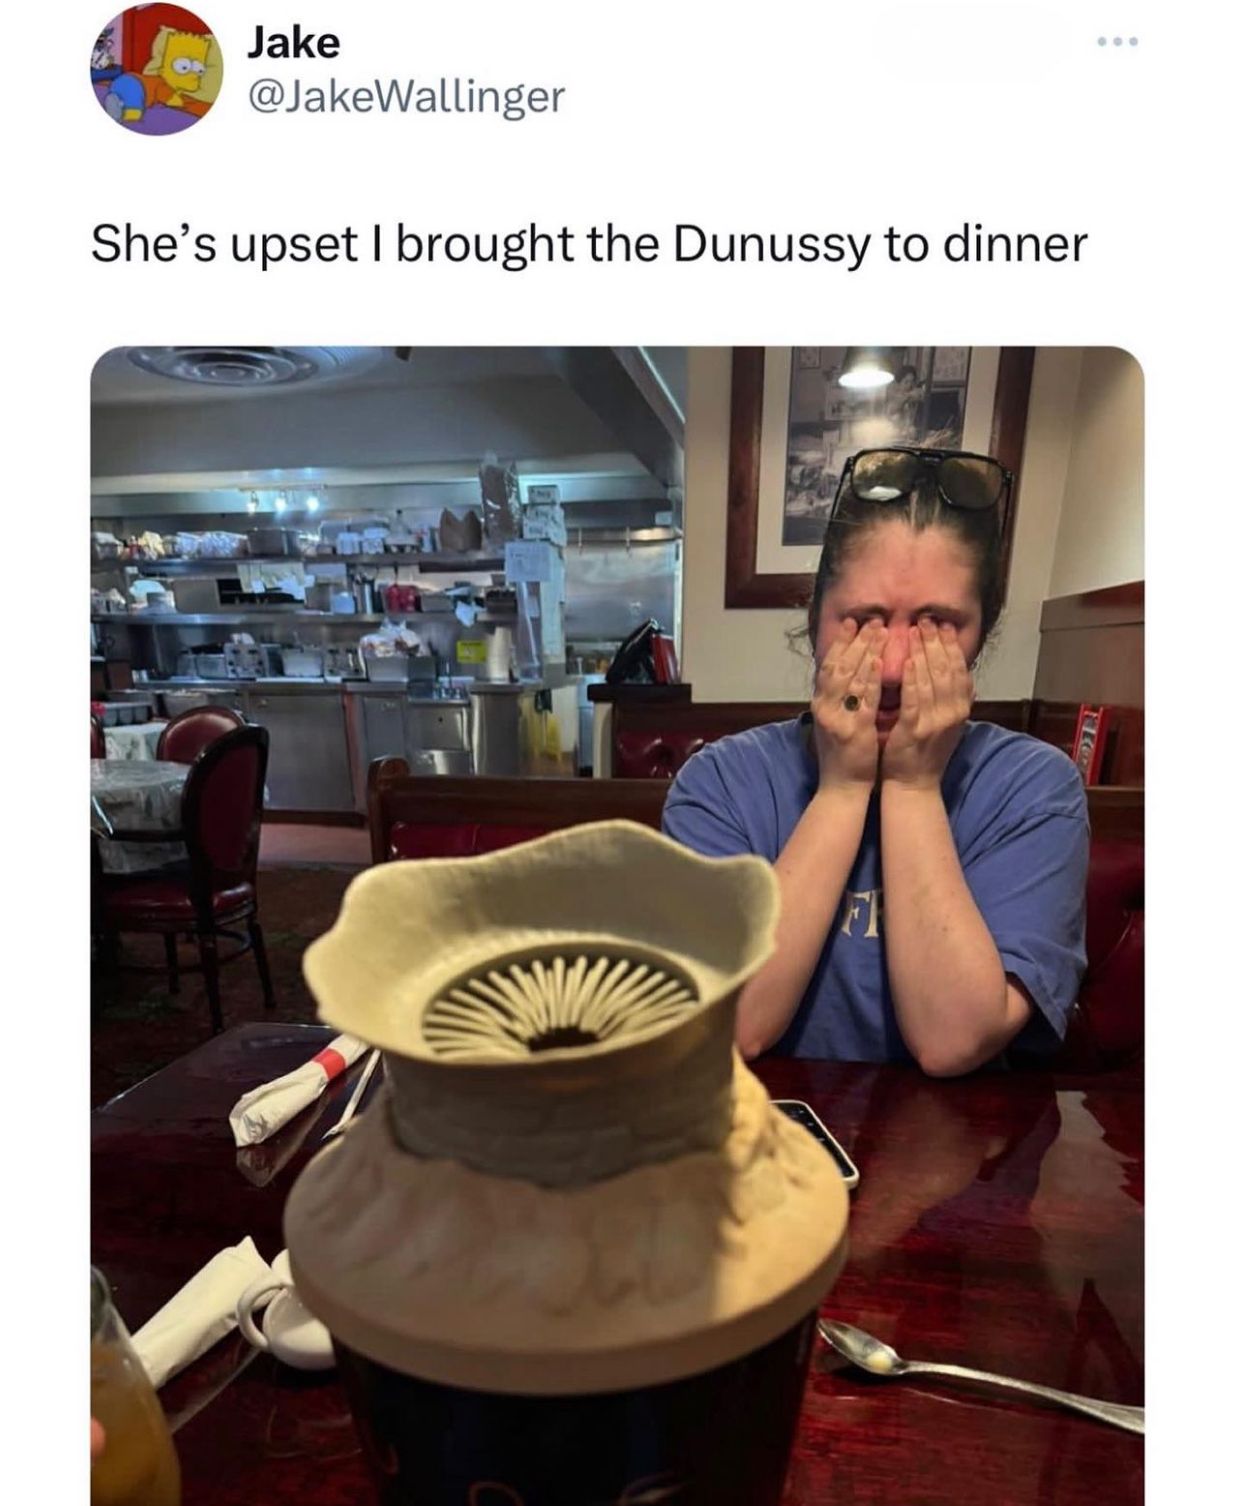 Not the Dunussy